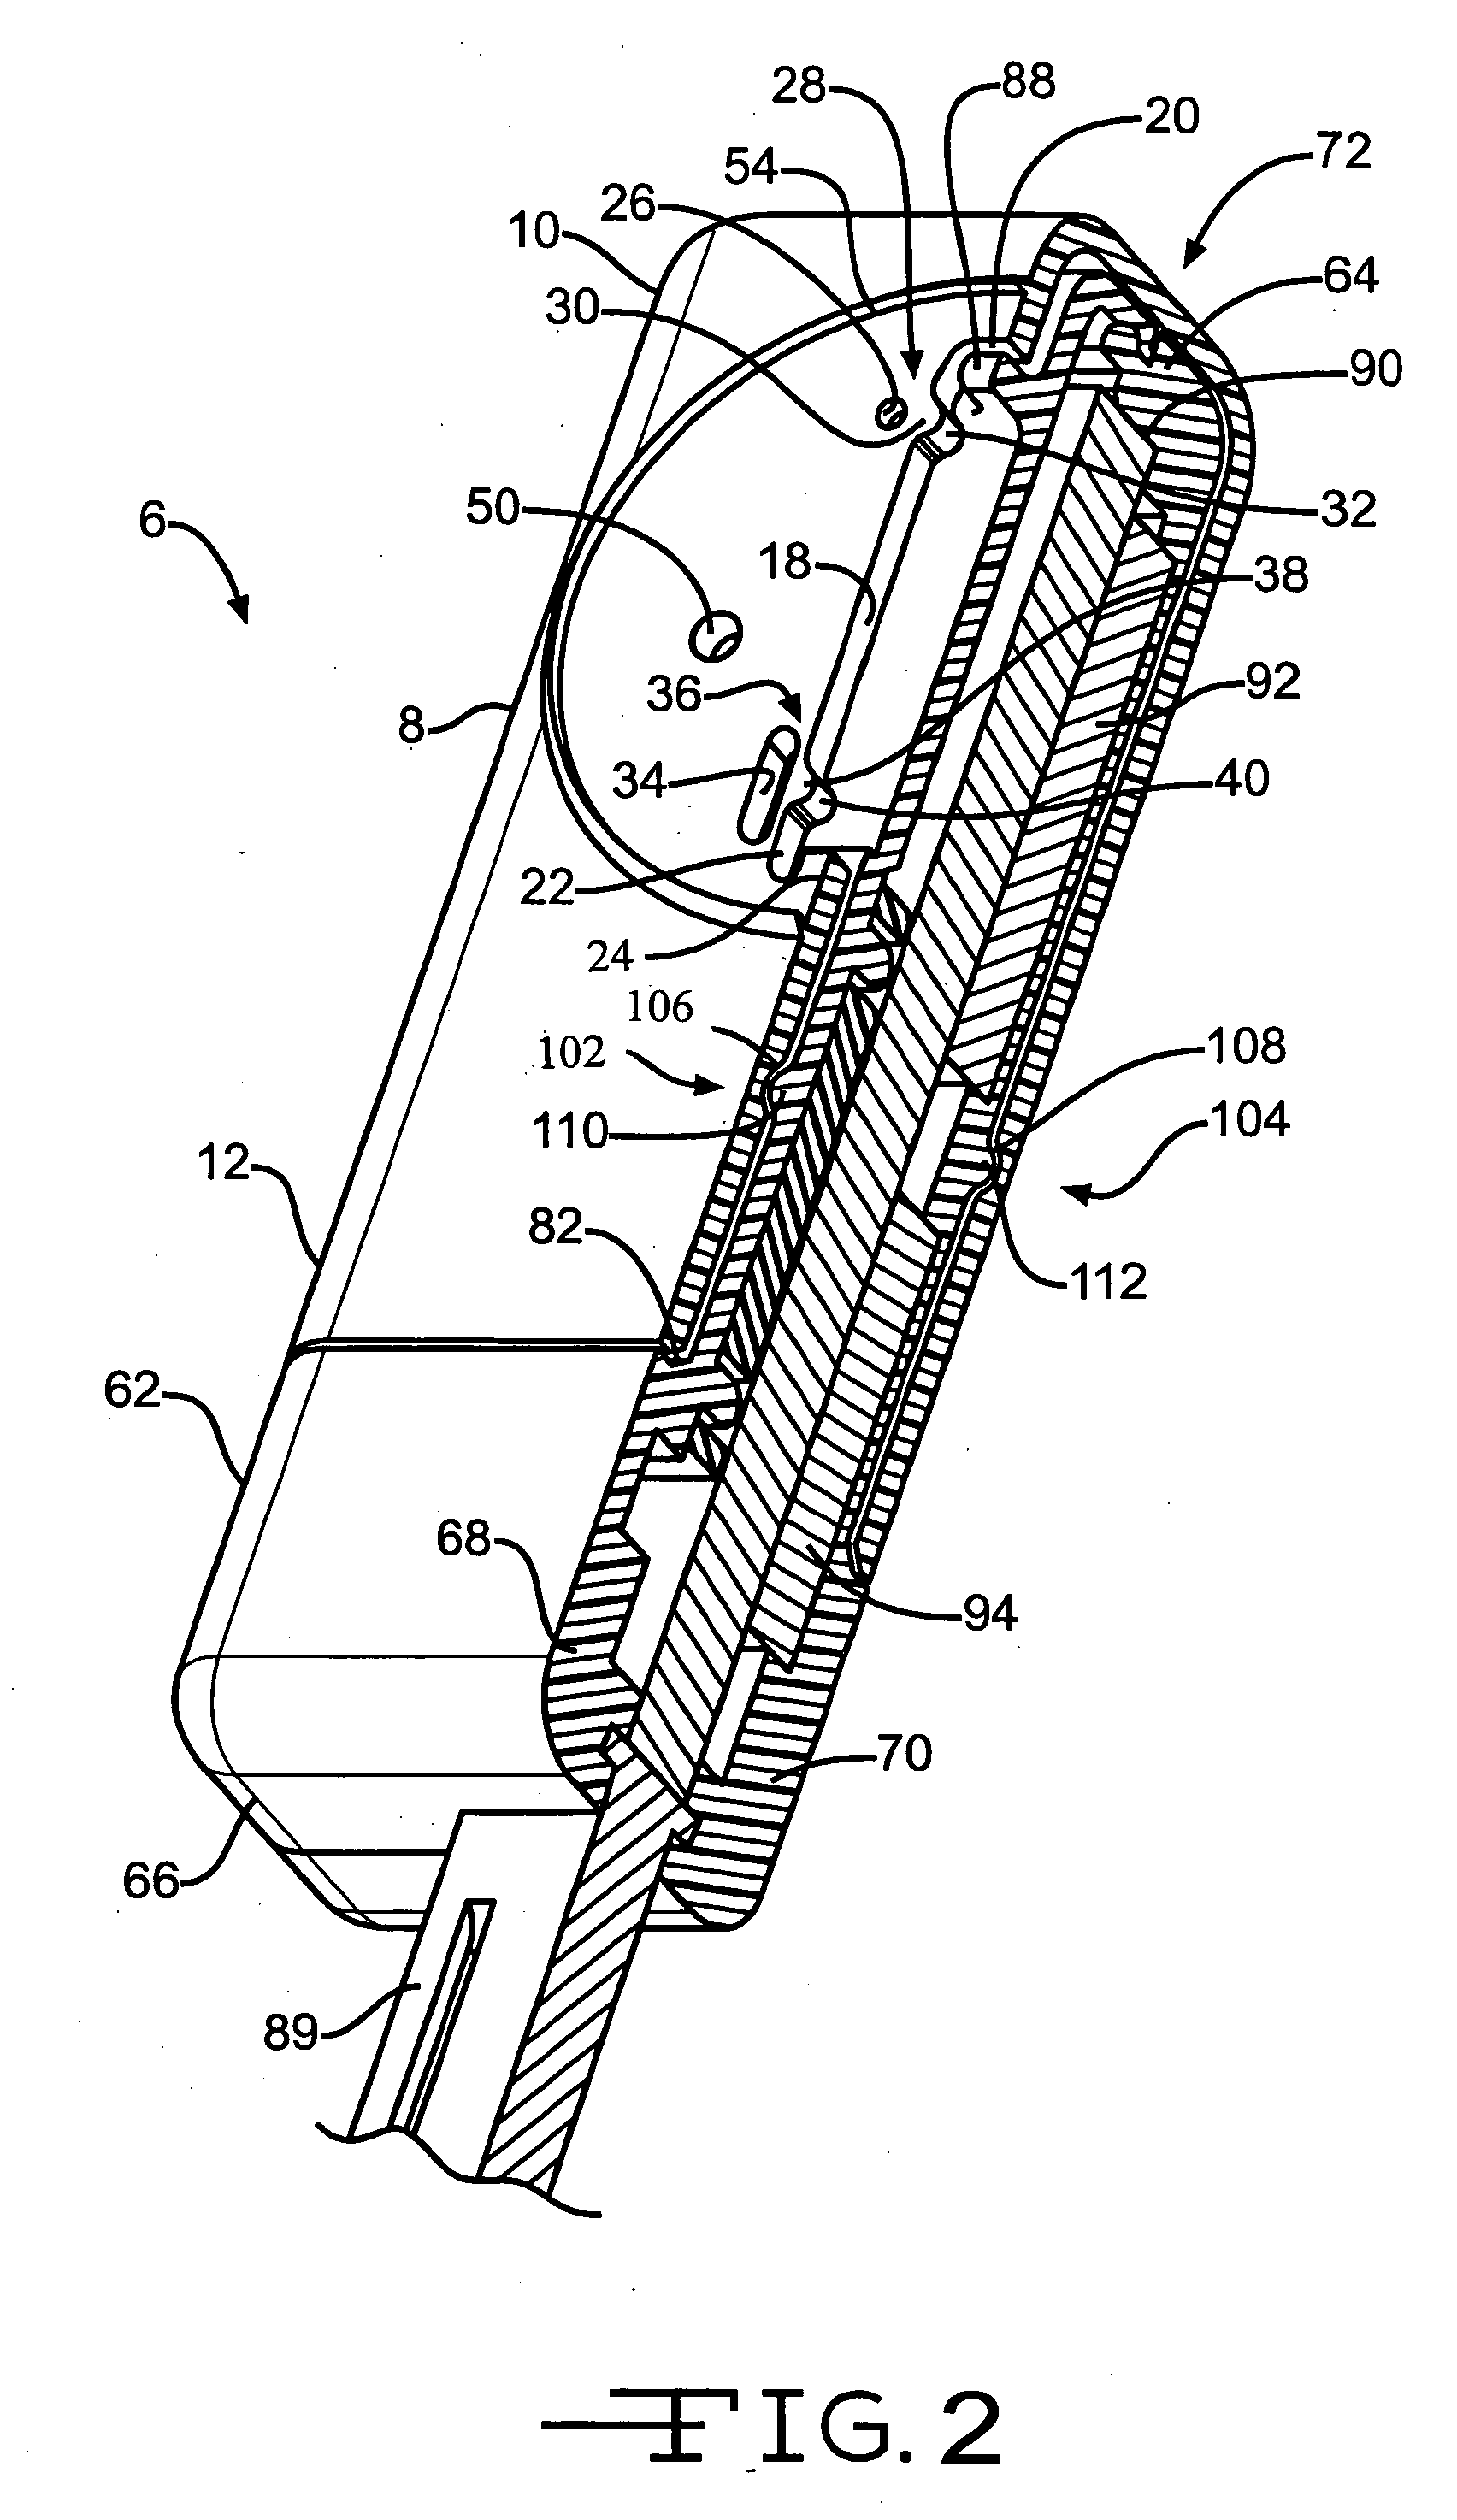 Key fob with detent mechanism